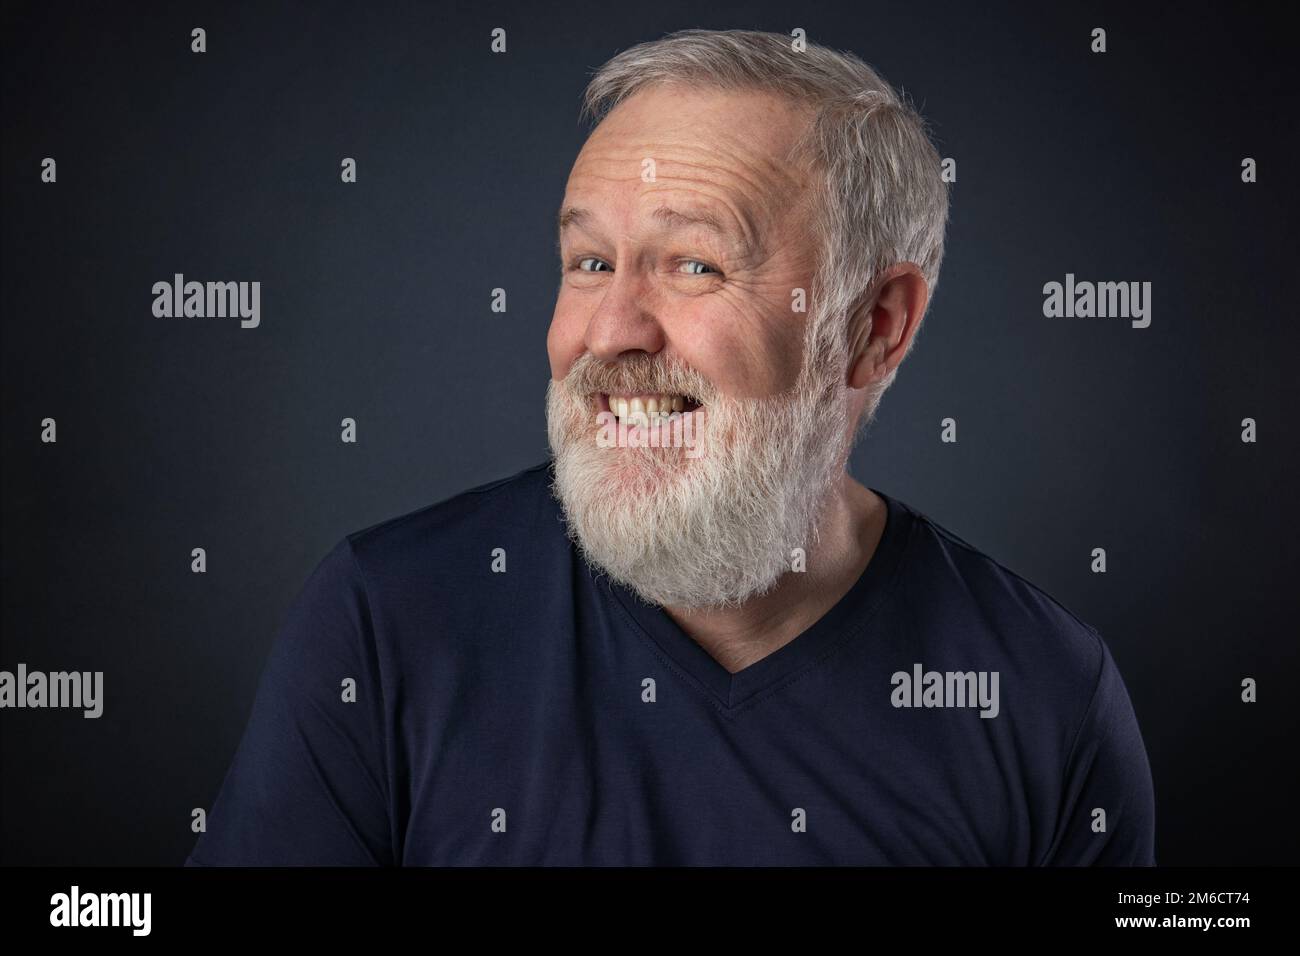 Old man pretending to laugh Stock Photo